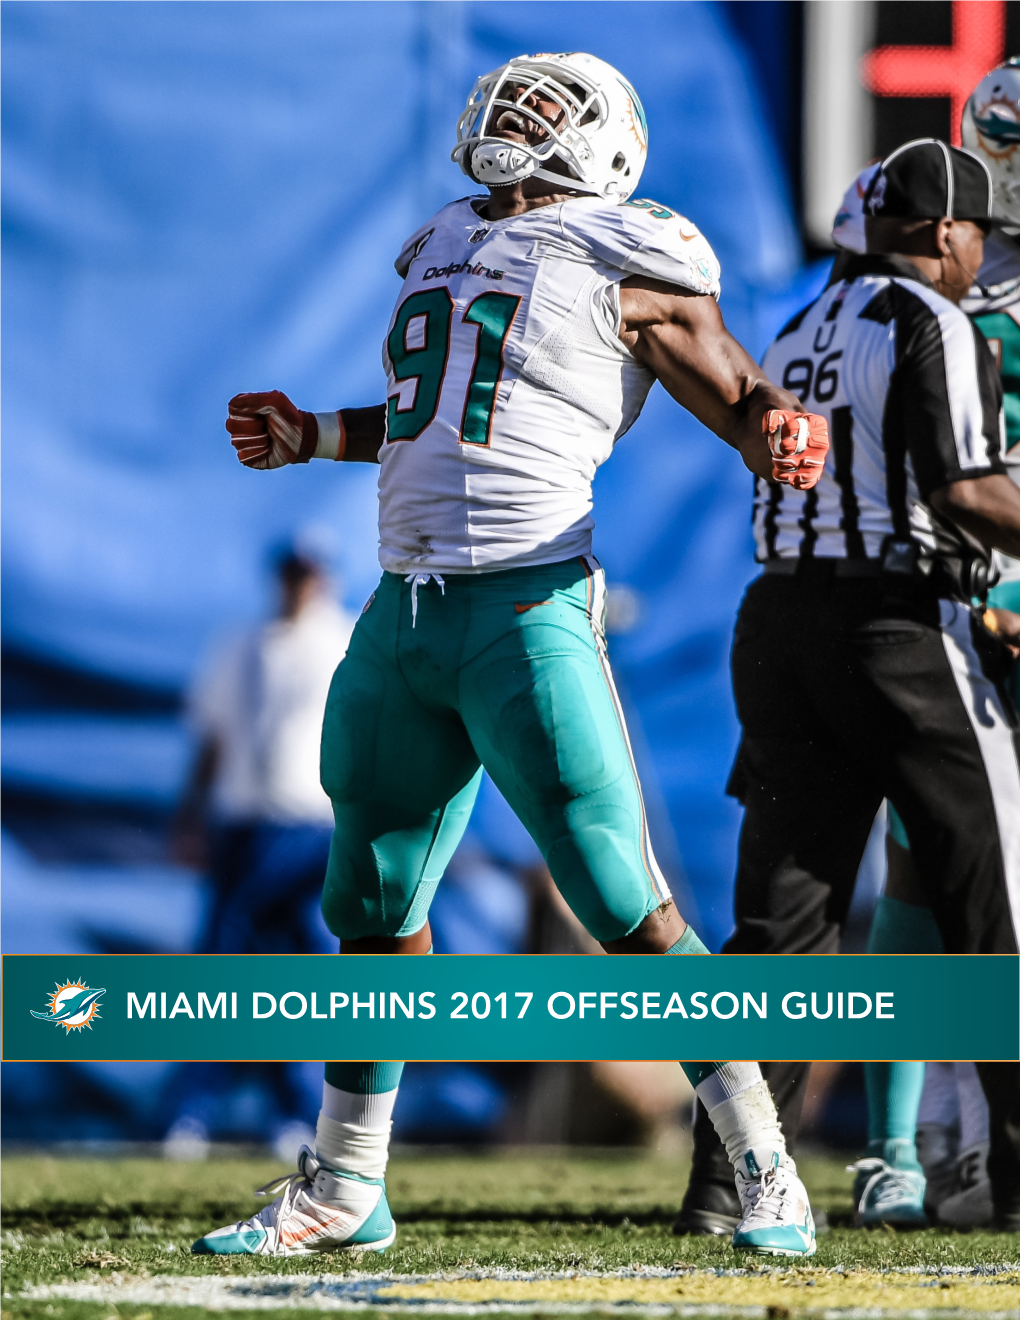 Miami Dolphins 2017 Offseason Guide 2017 Miami Dolphins Schedule